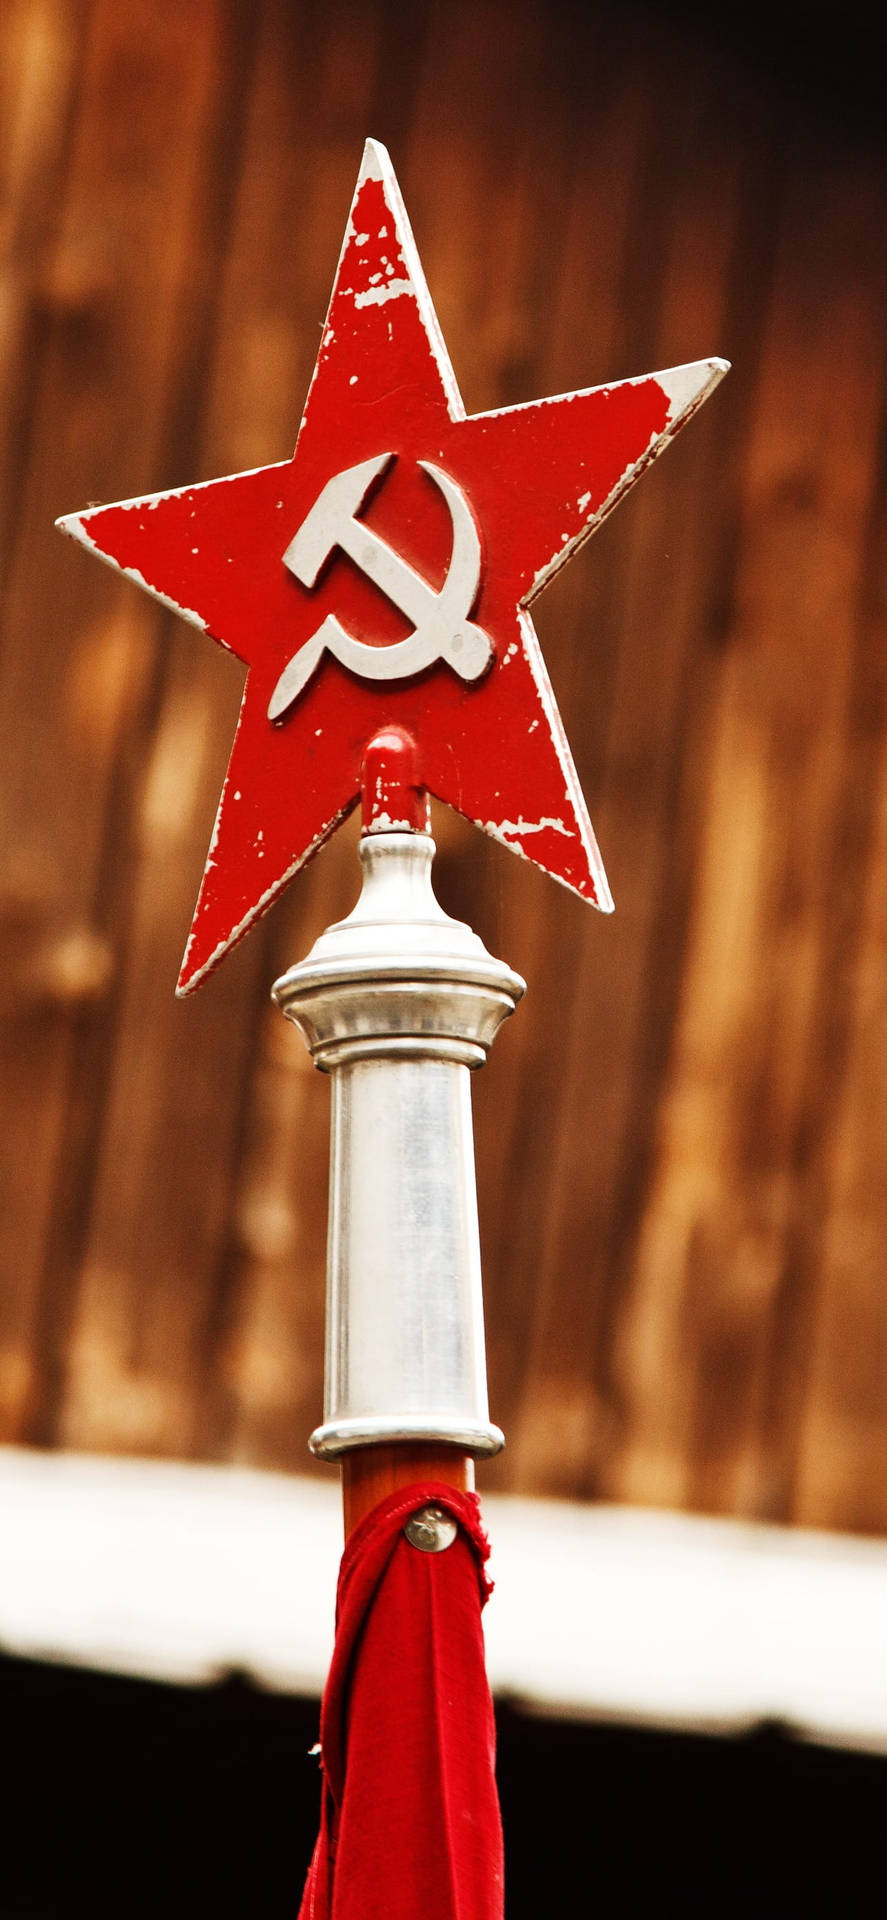 Red Star With Hammer And Sickle